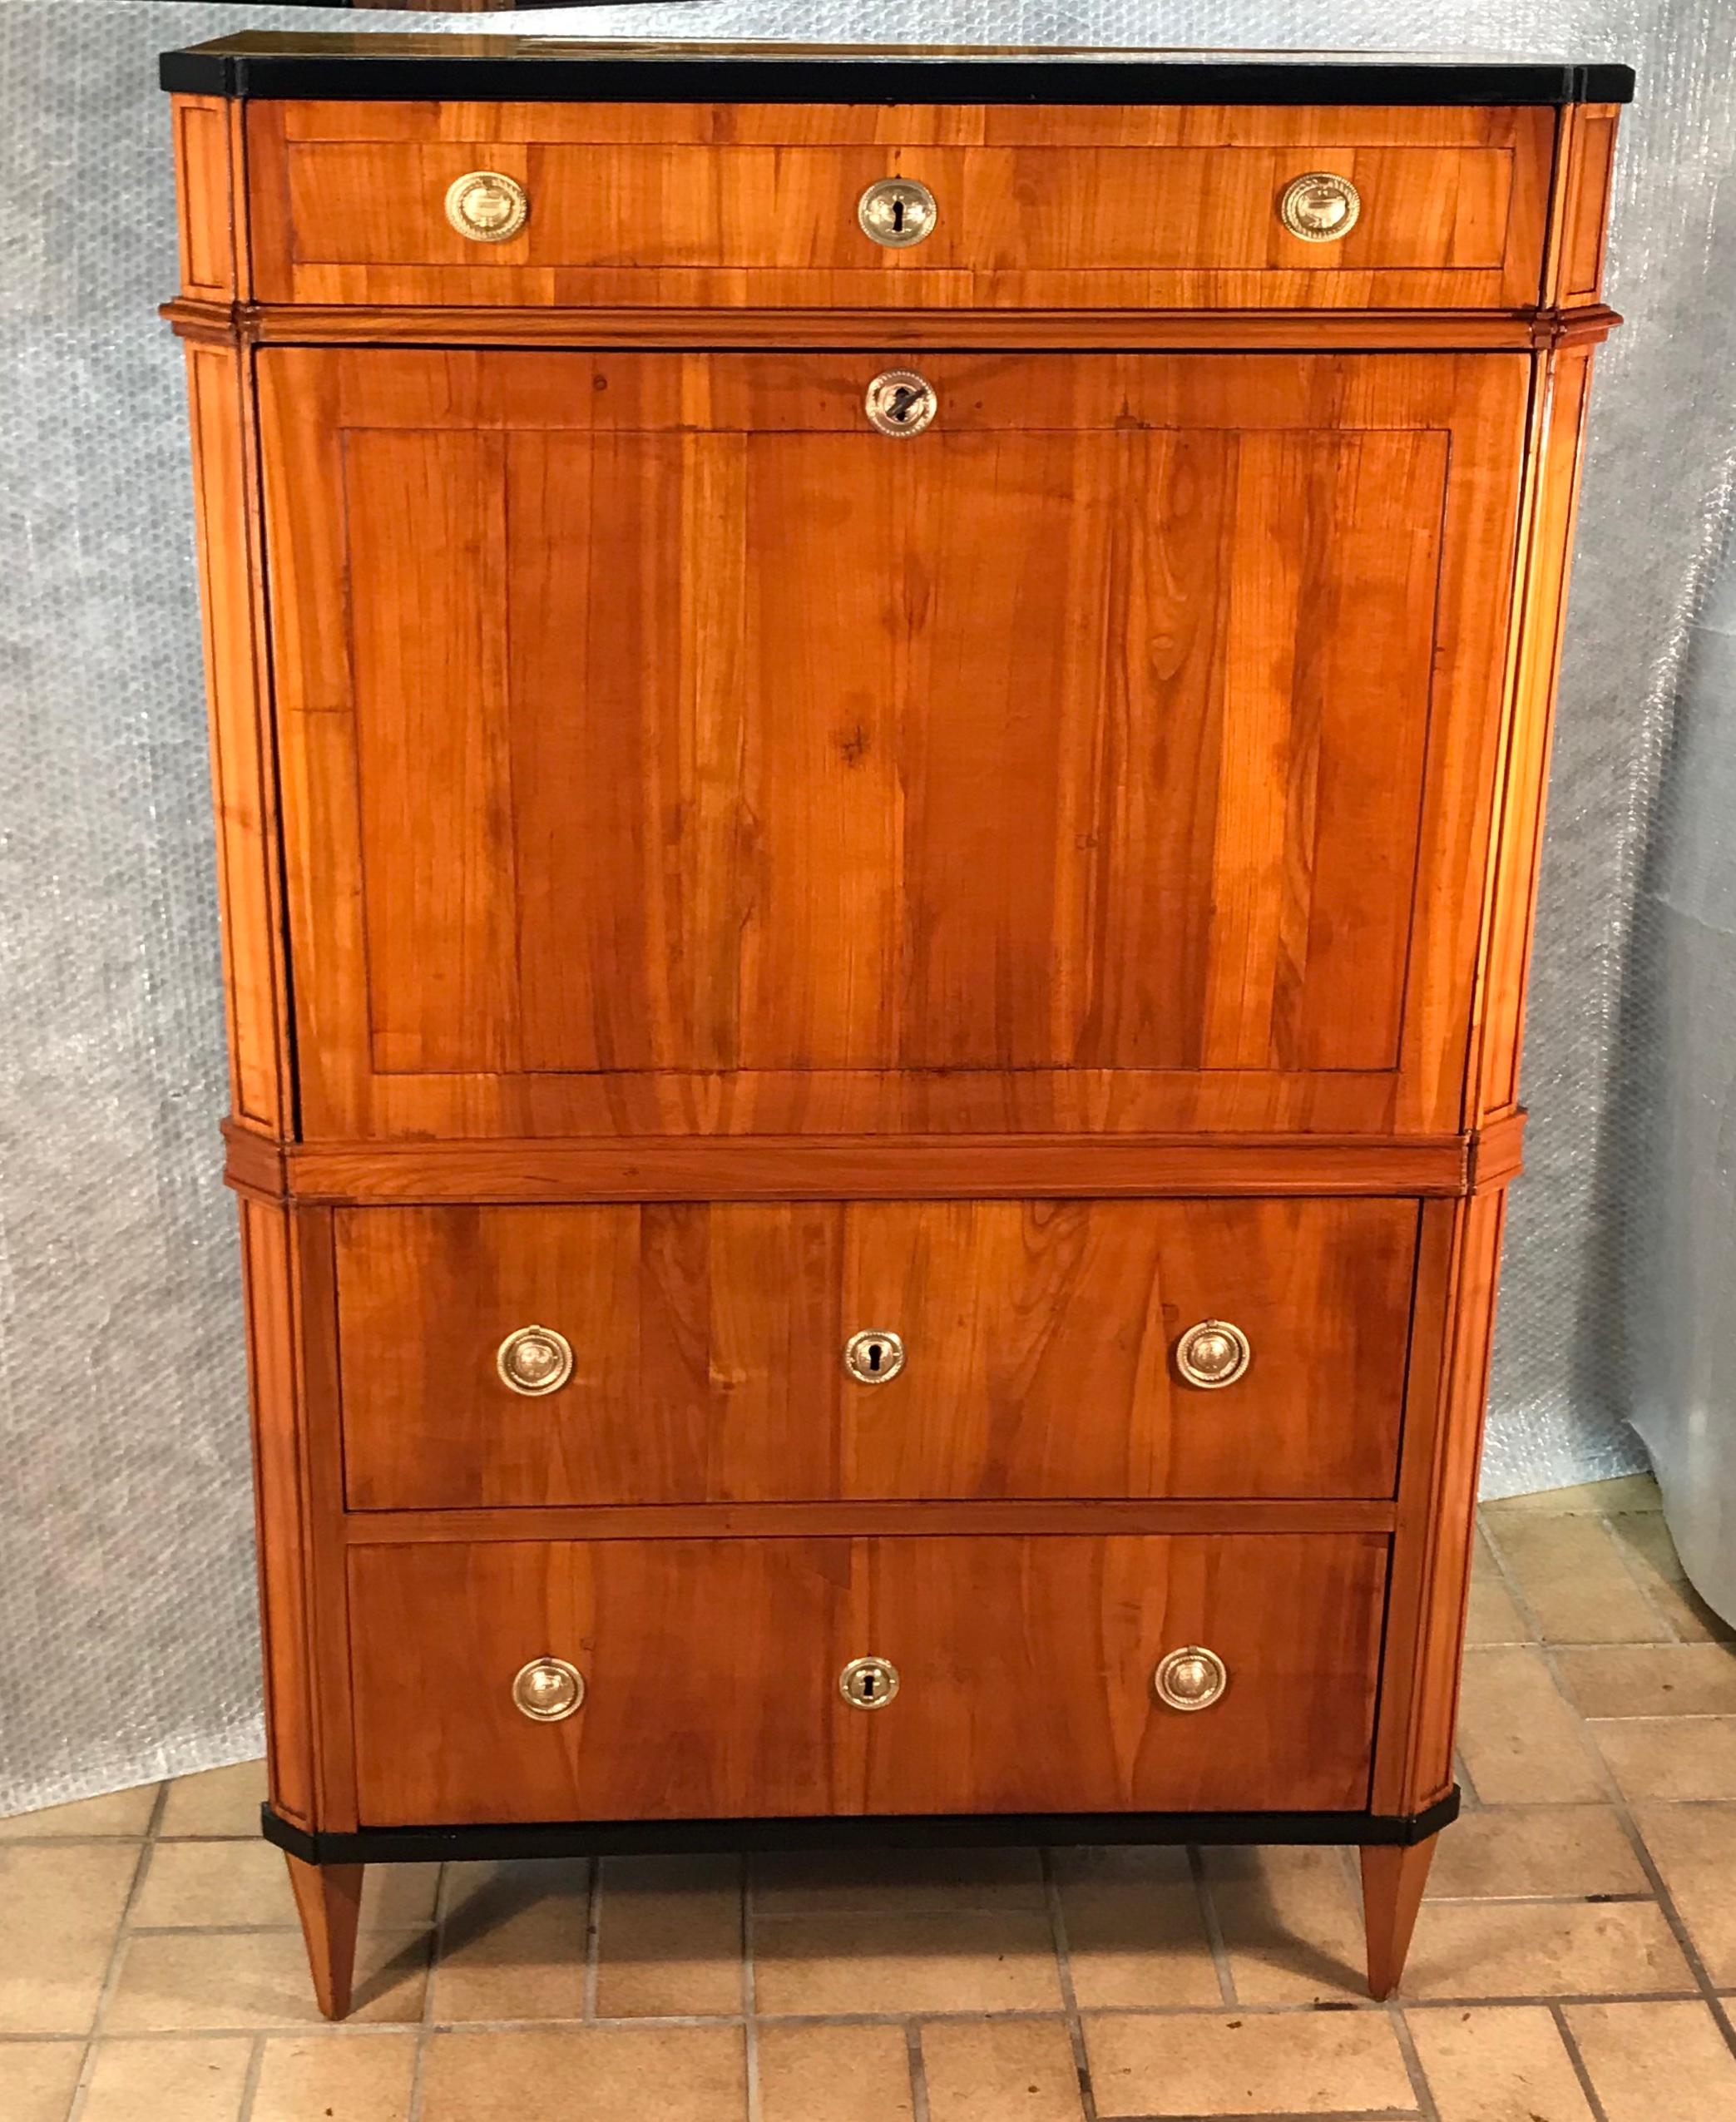 Exquisite drop front desk, Switzerland 1810-20, beautiful cherry veneer with ebonized details. The inside of the writing top has 12 small drawers and a central open compartment, which is decorated with a mirror and a checkered pattern floor. 
The